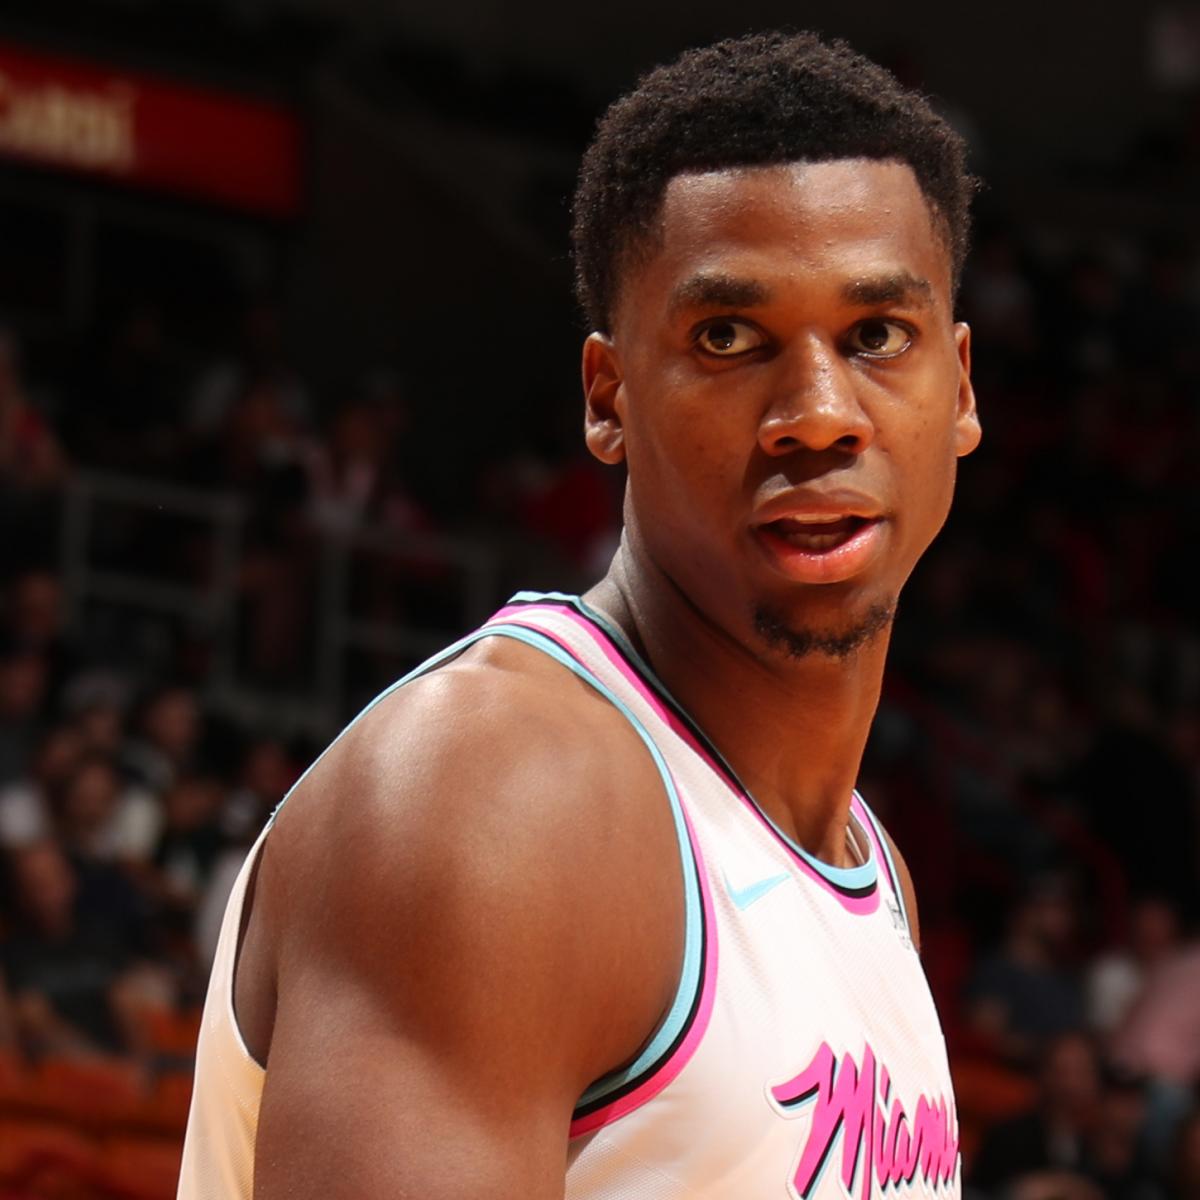 Low minutes, but high efficiency for Hassan Whiteside this season : r/heat